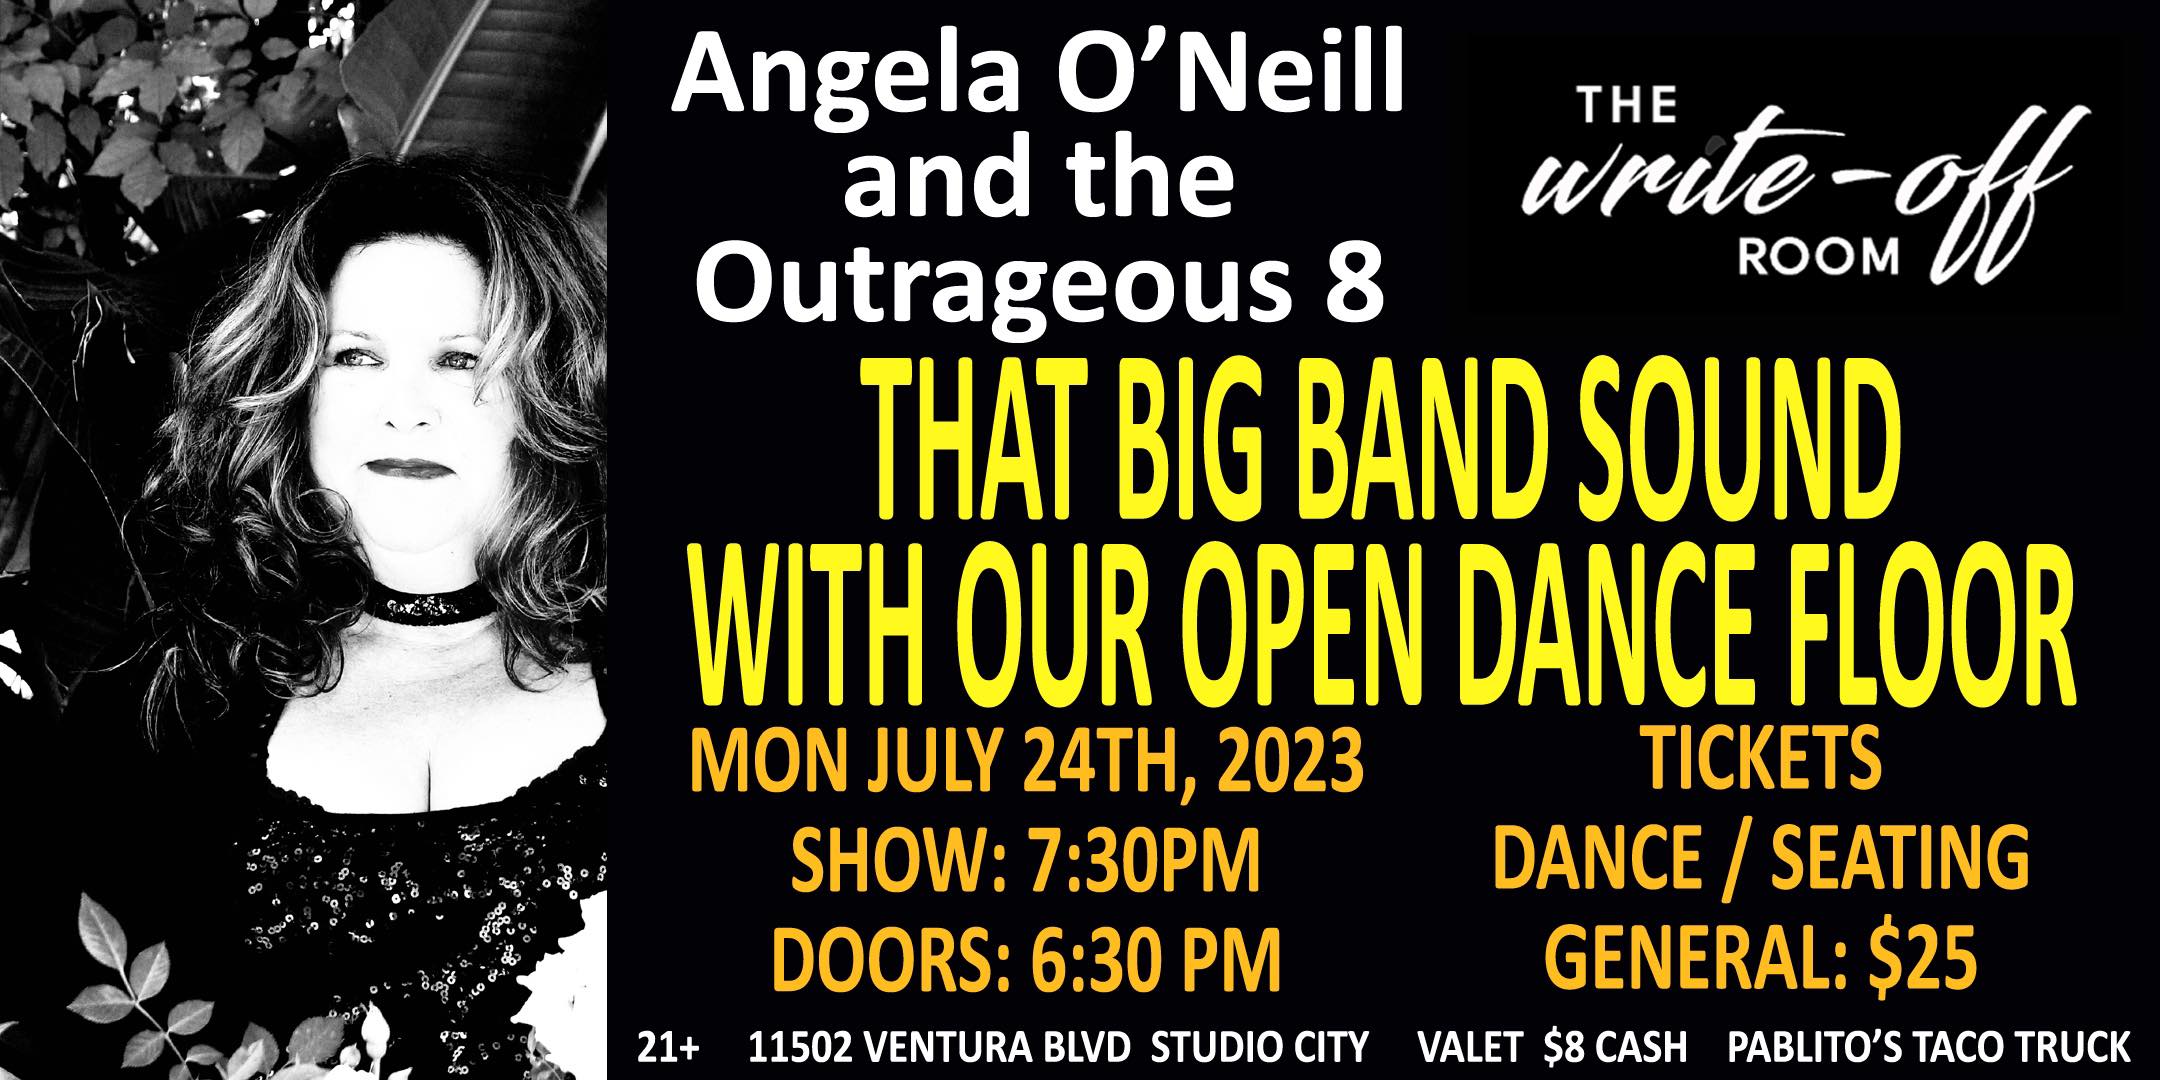 Angela O’Neill and the Outrageous 8 and That Big Band Sound at the Write-Off Room, Studio City